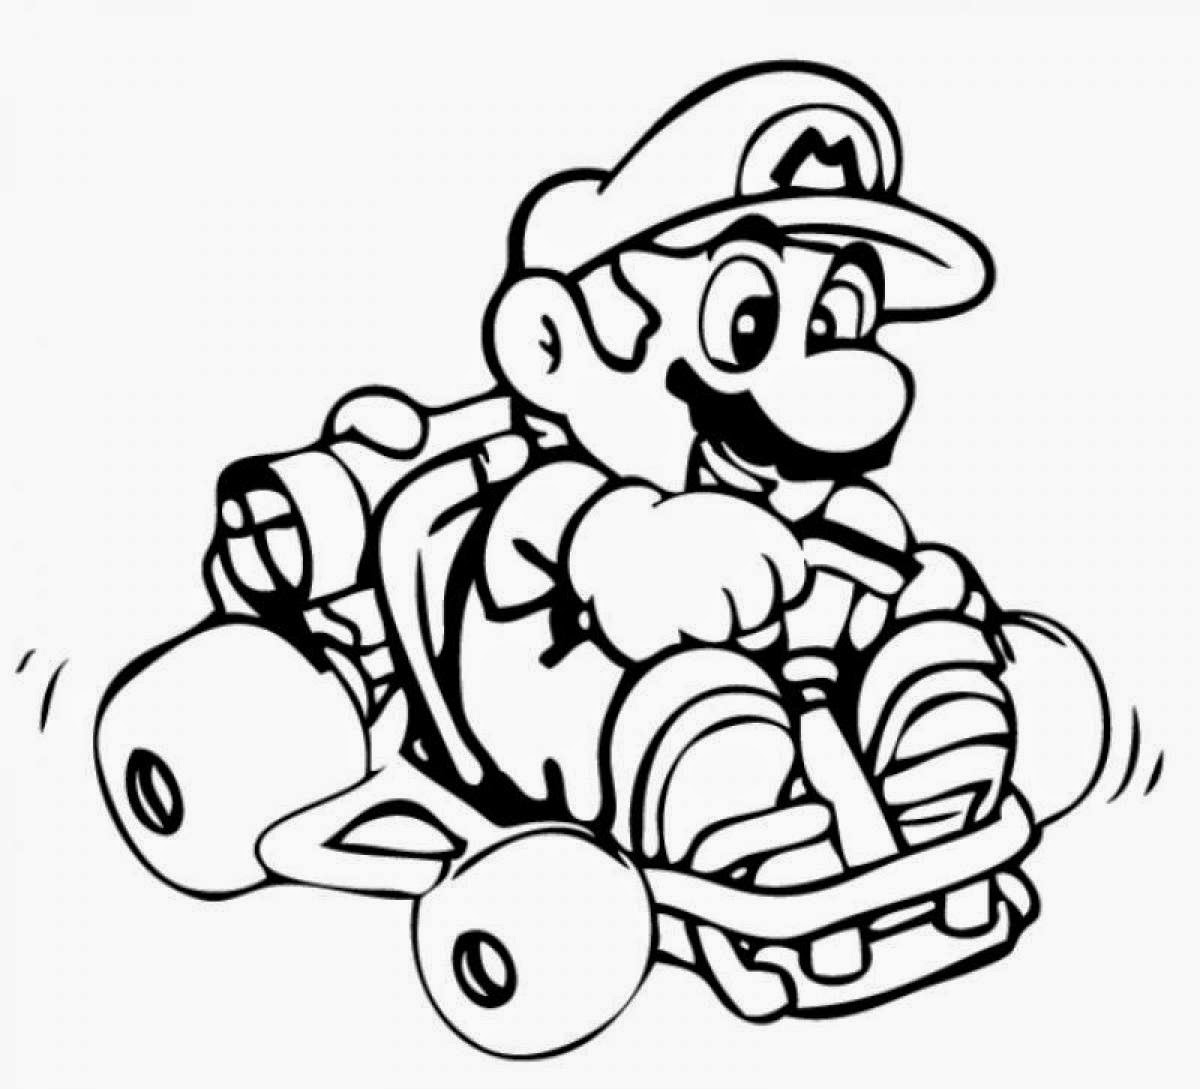 coloring-pages-mario-coloring-pages-free-and-printable